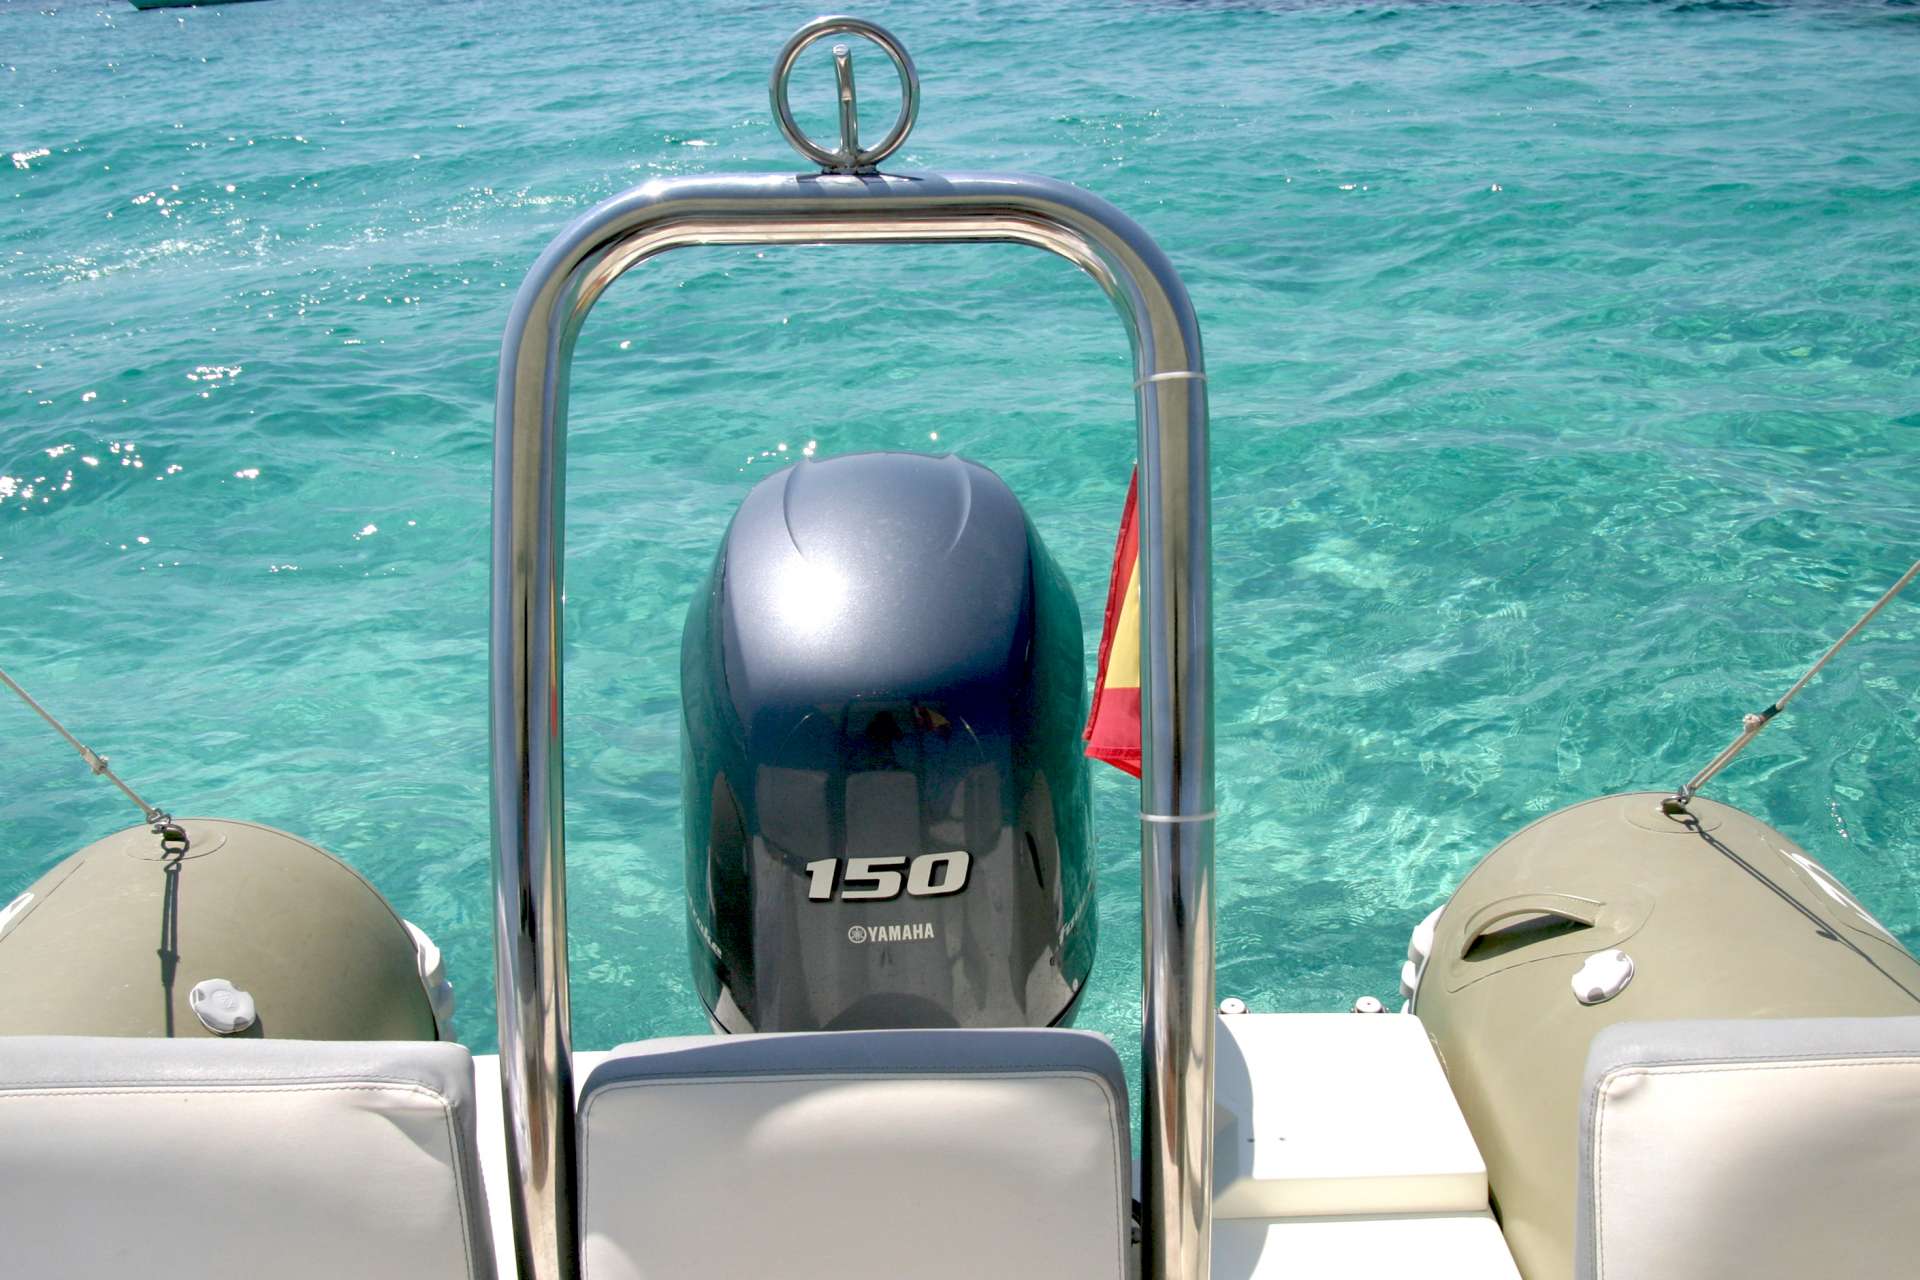 Discover the Formentera Island with this comfortable inflatable rib in Ibiza!